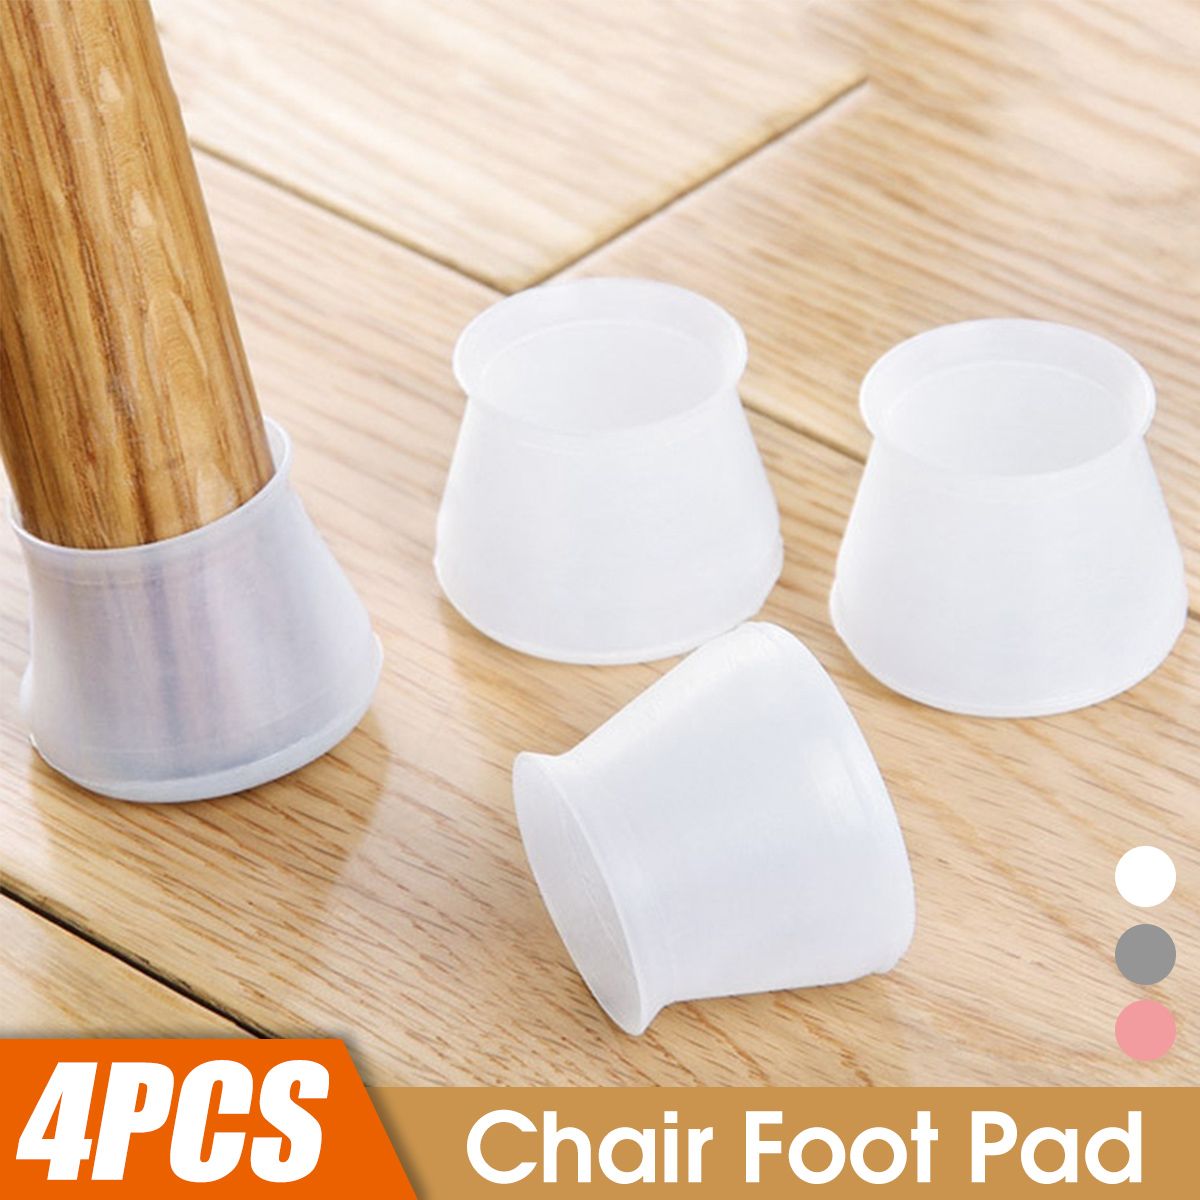 4pcs-Silicone-Non-slip-Chair-Table-Leg-Mat-Cover-Protector-Chair-Foot-Protection-1712694